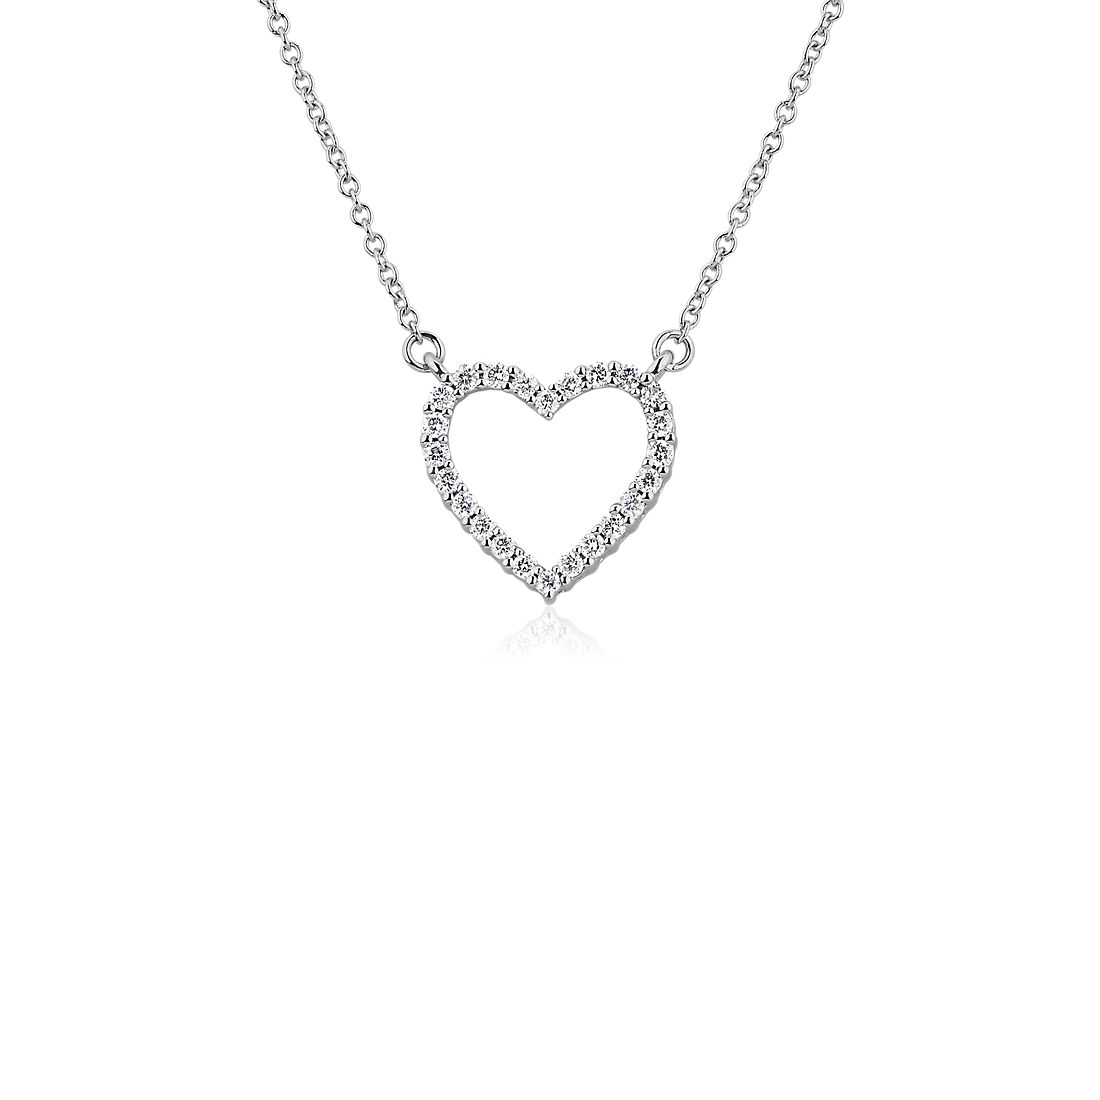 Diamond Heart Shaped Necklace in 14k White Gold (1/6 ct. tw.)